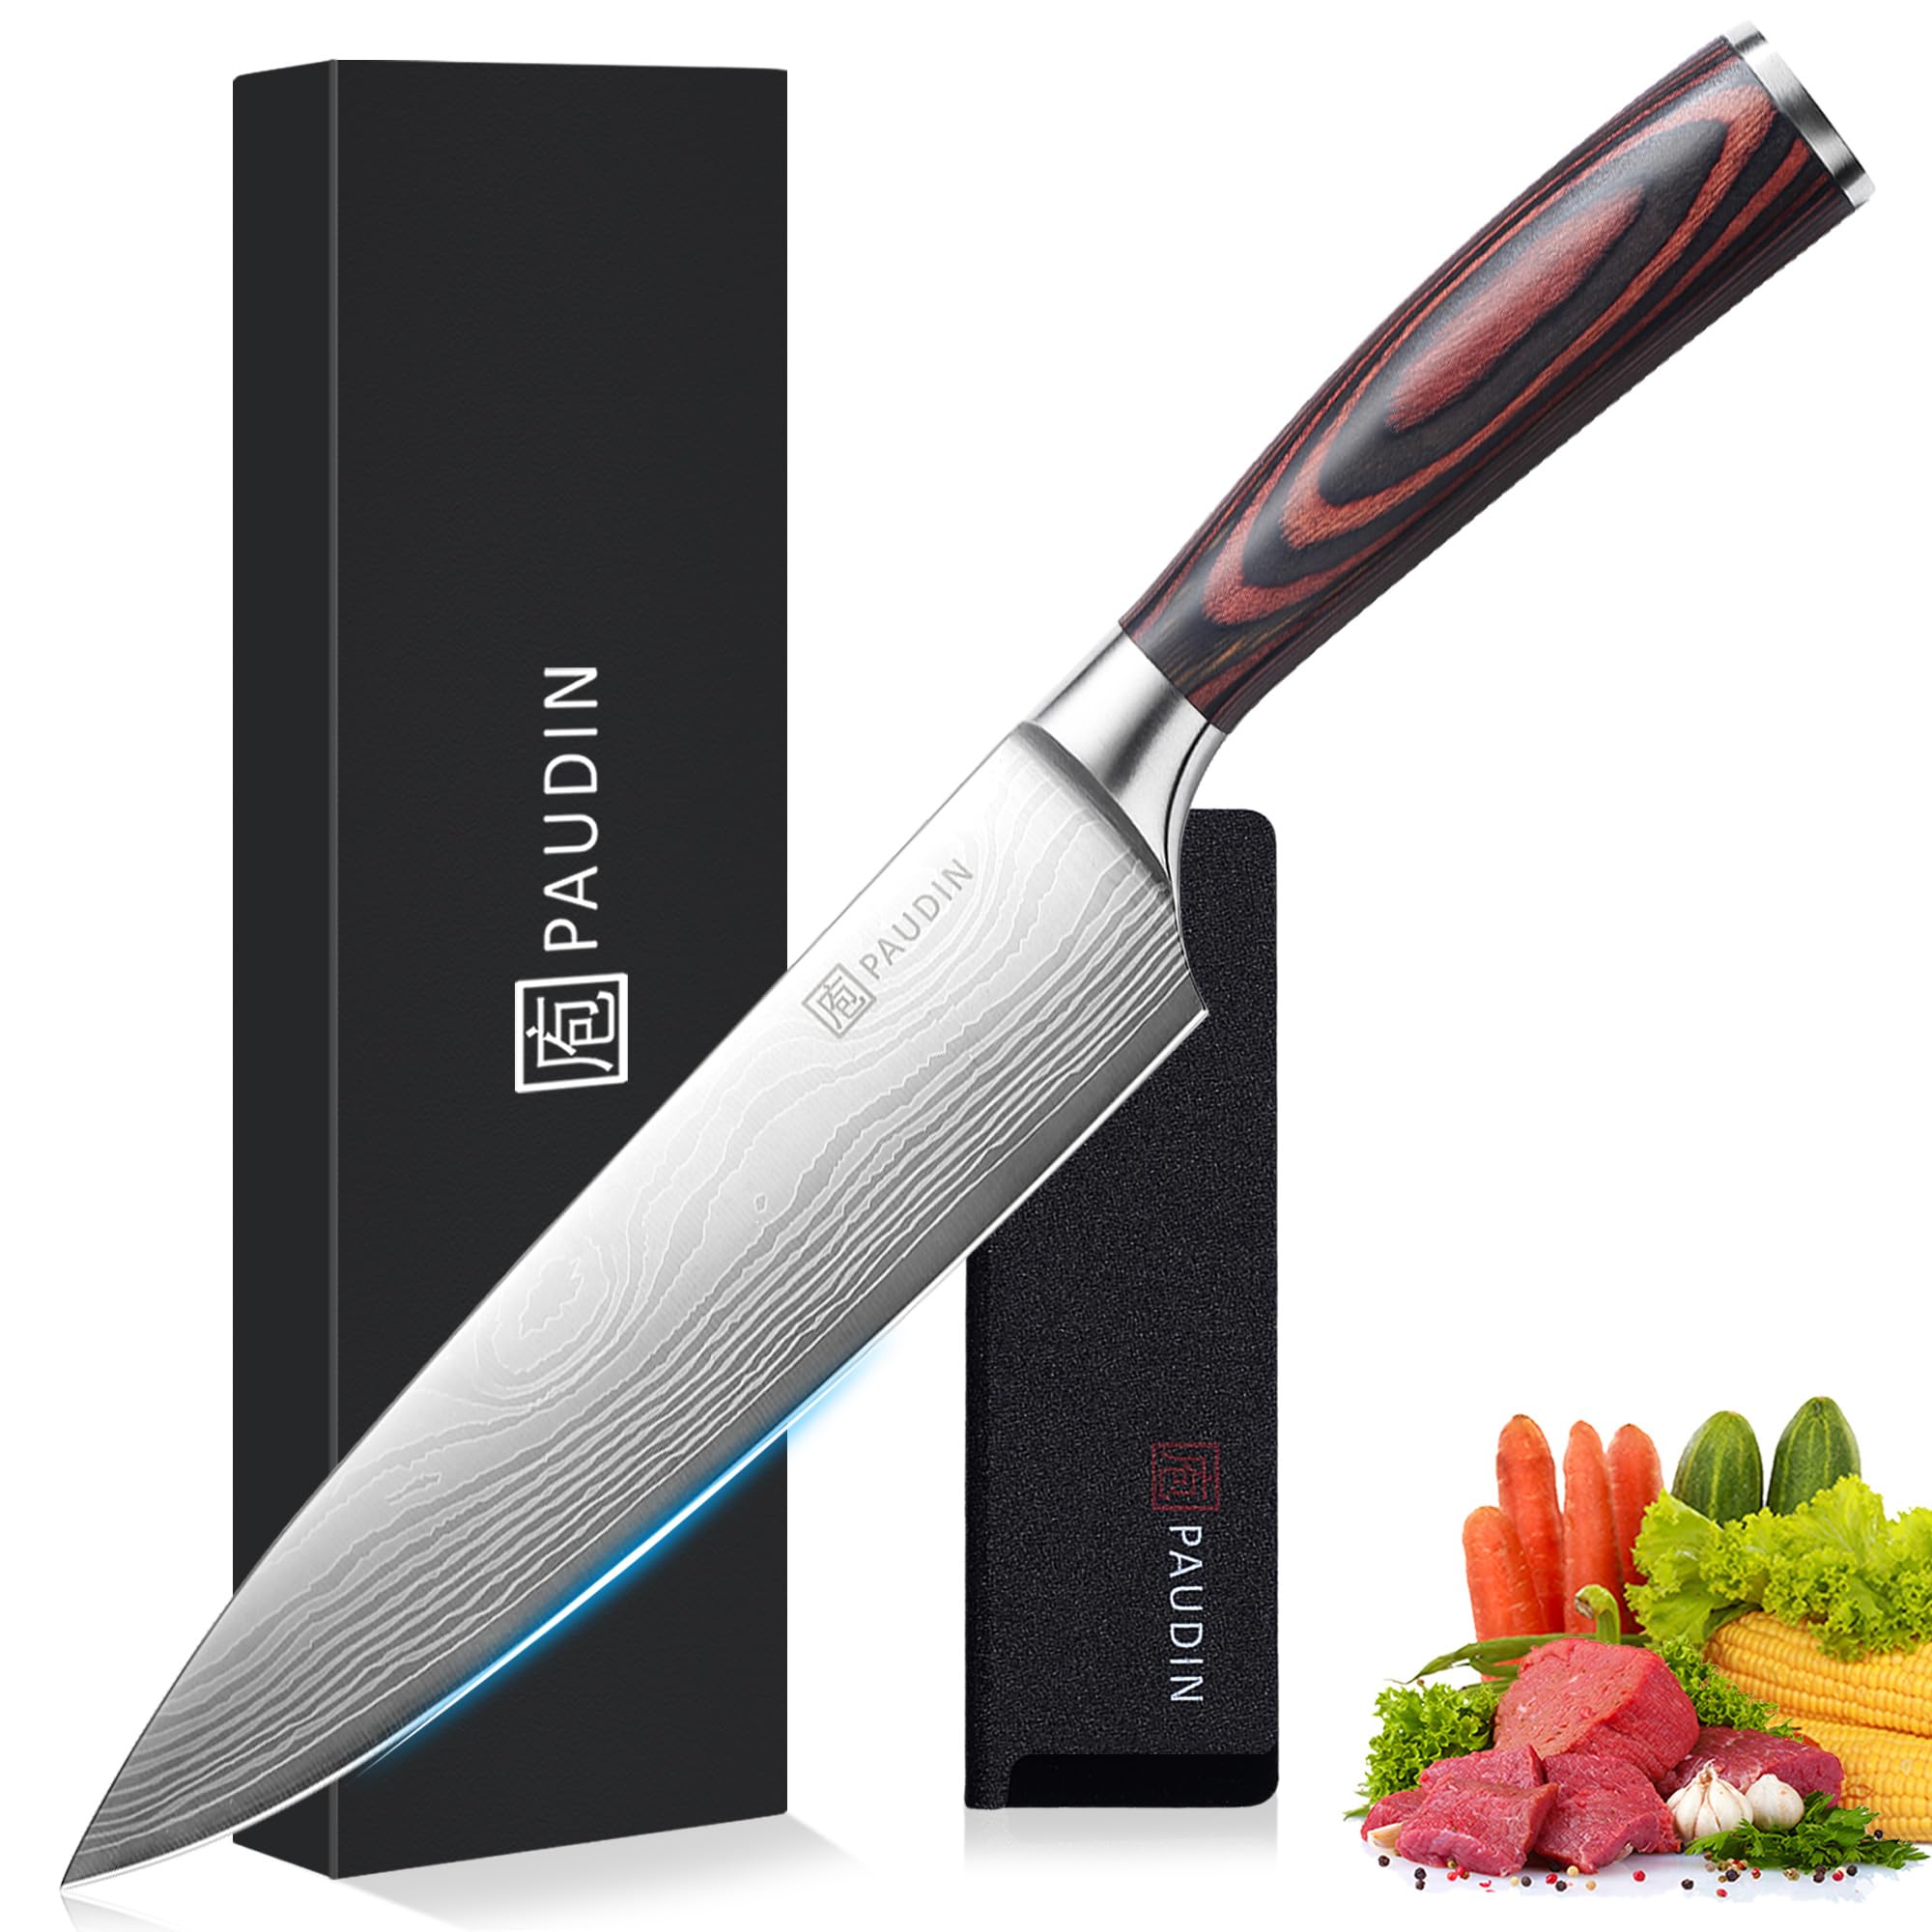 PAUDIN Kitchen Knifes - High Carbon Stainless Steel Sharp Kitchen Knife with Ergonomic Handle $24